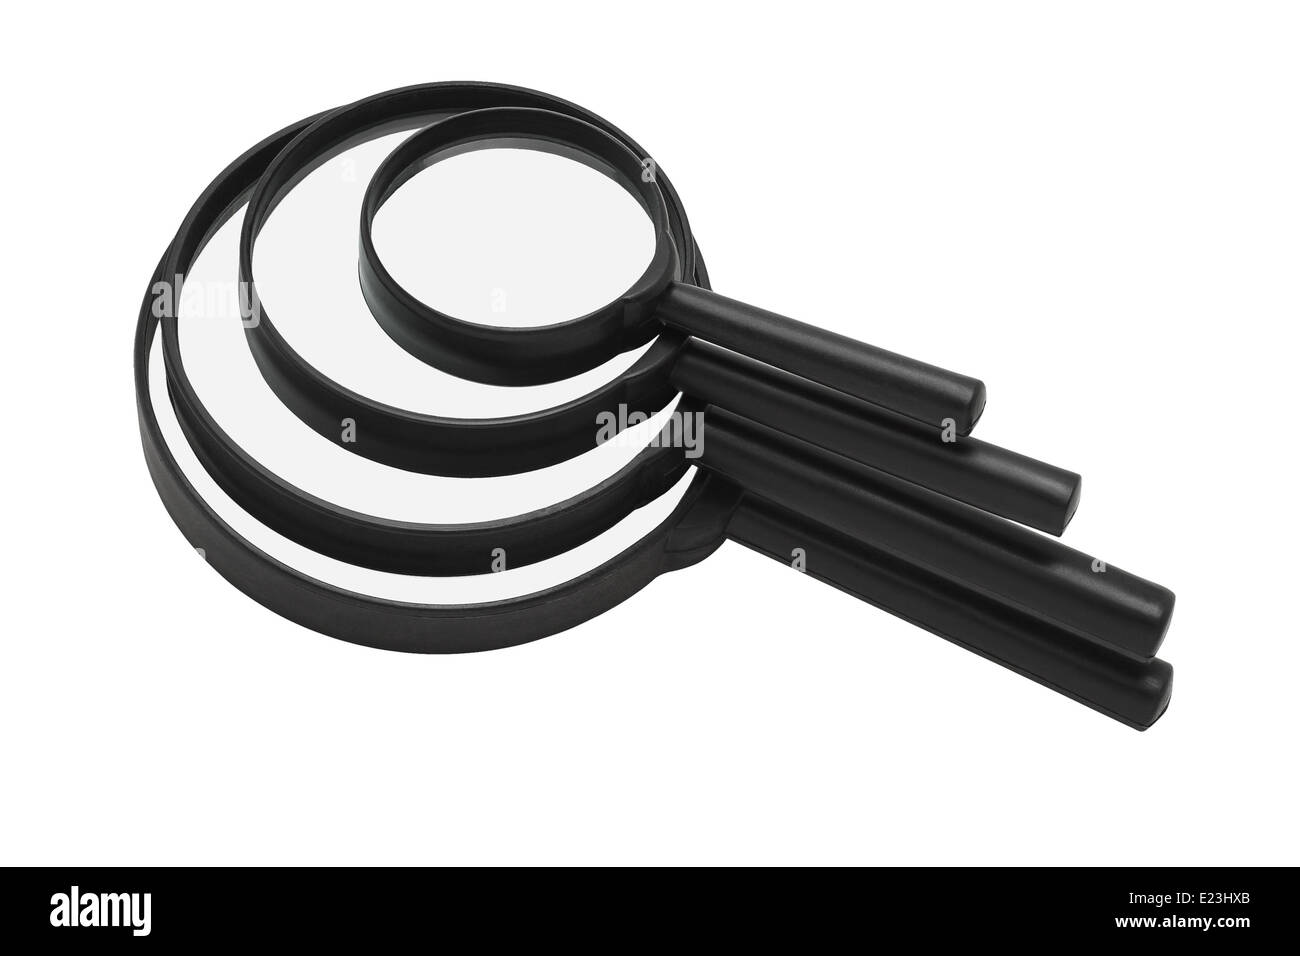 Stack Of Magnifying Glasses On White Background Stock Photo